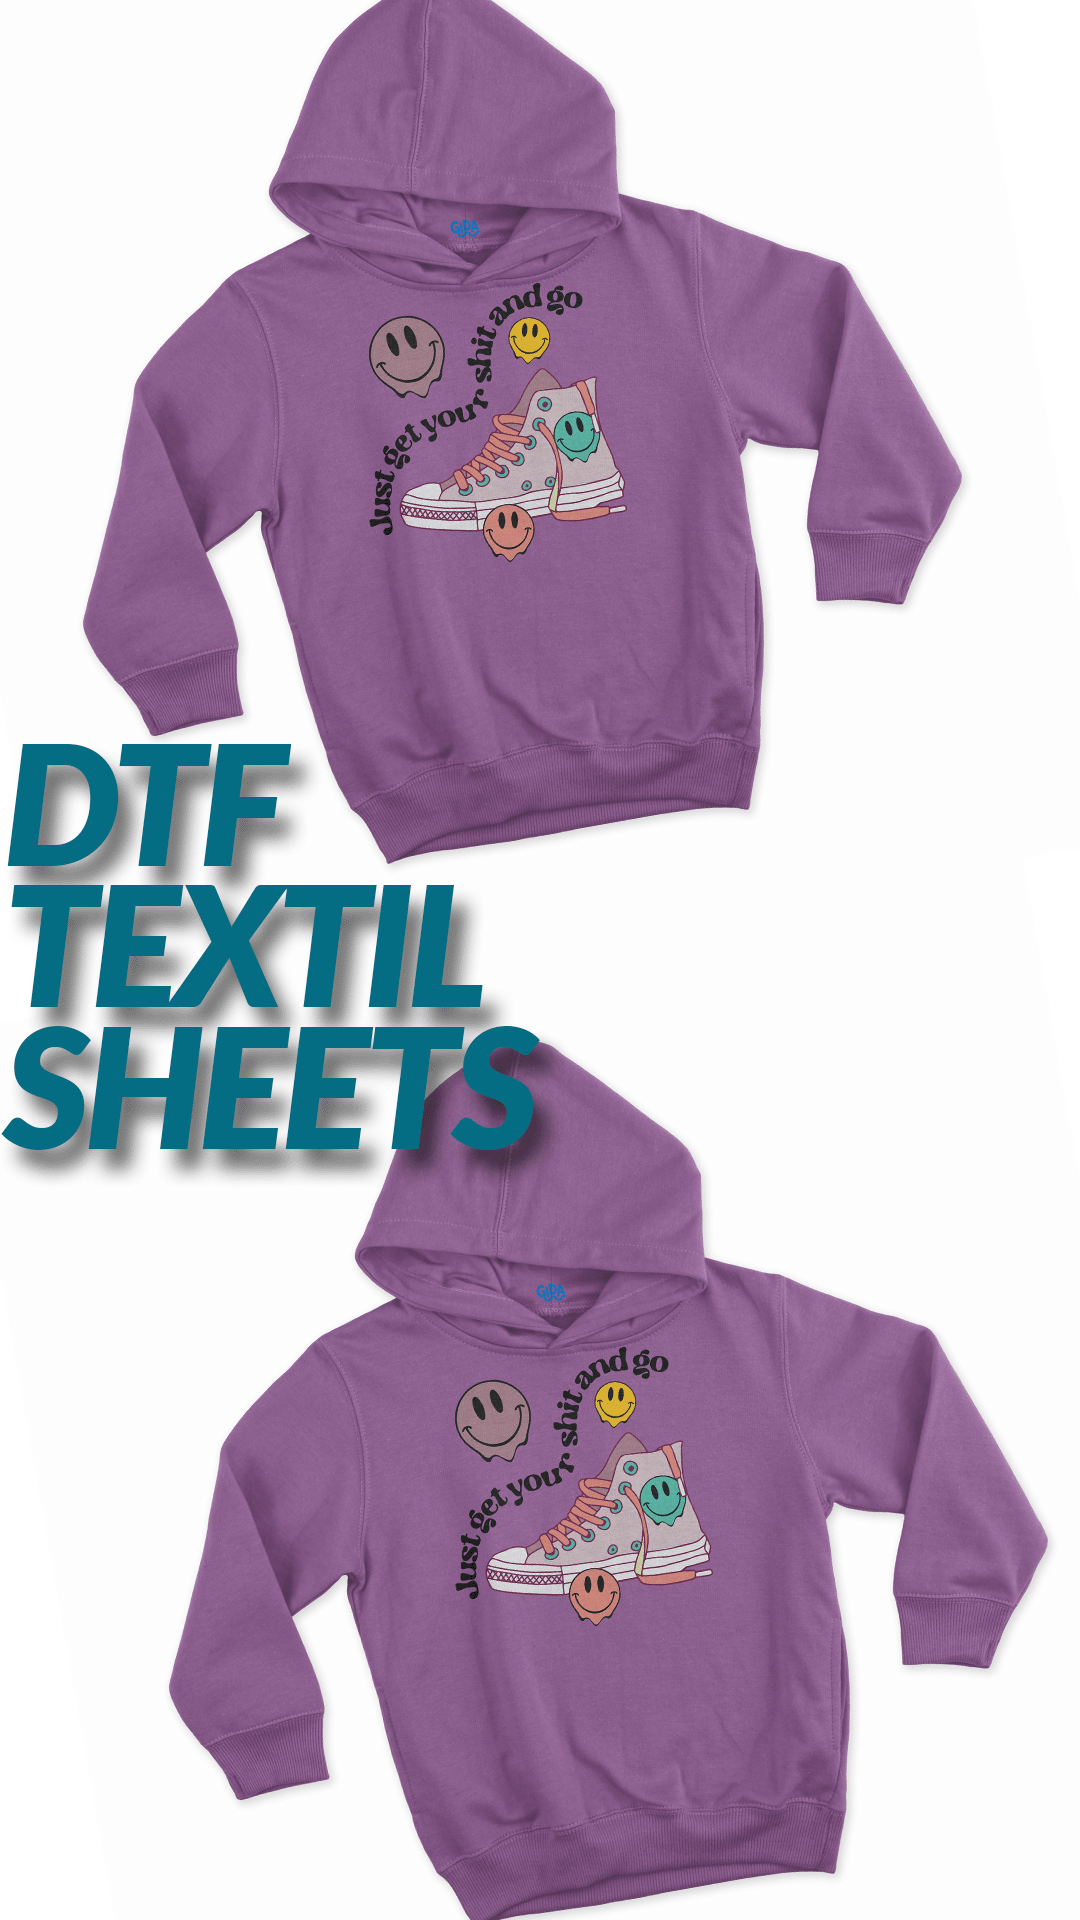 DTF - Get your Shit and go - Textil